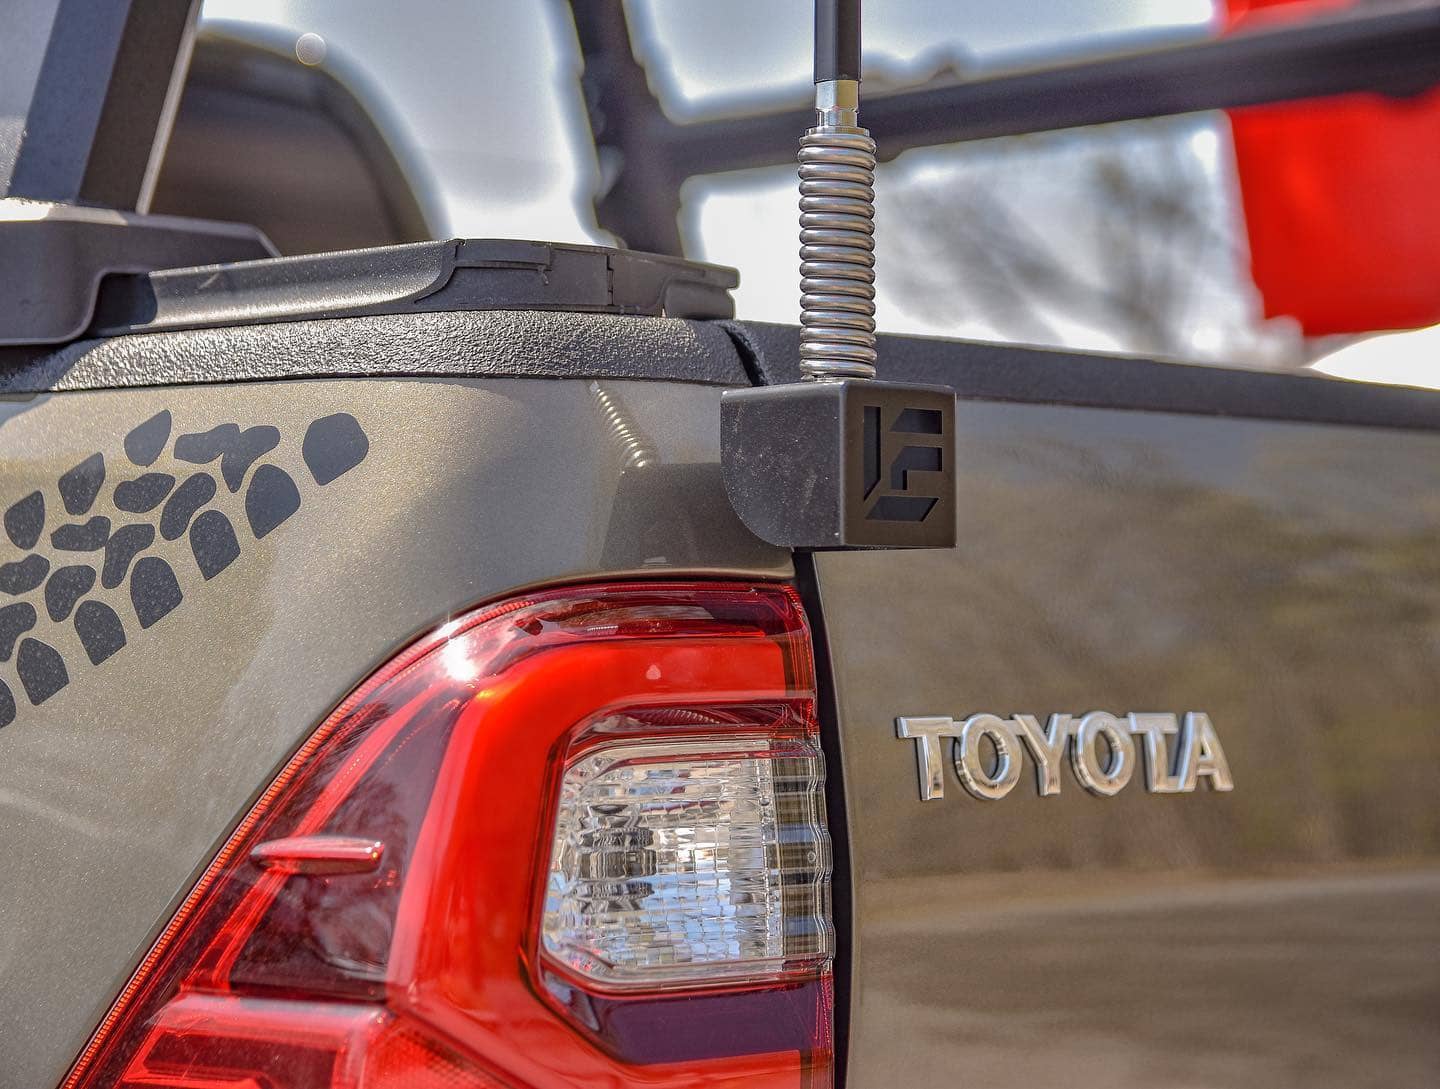 Toyota Hilux bed antenna mount